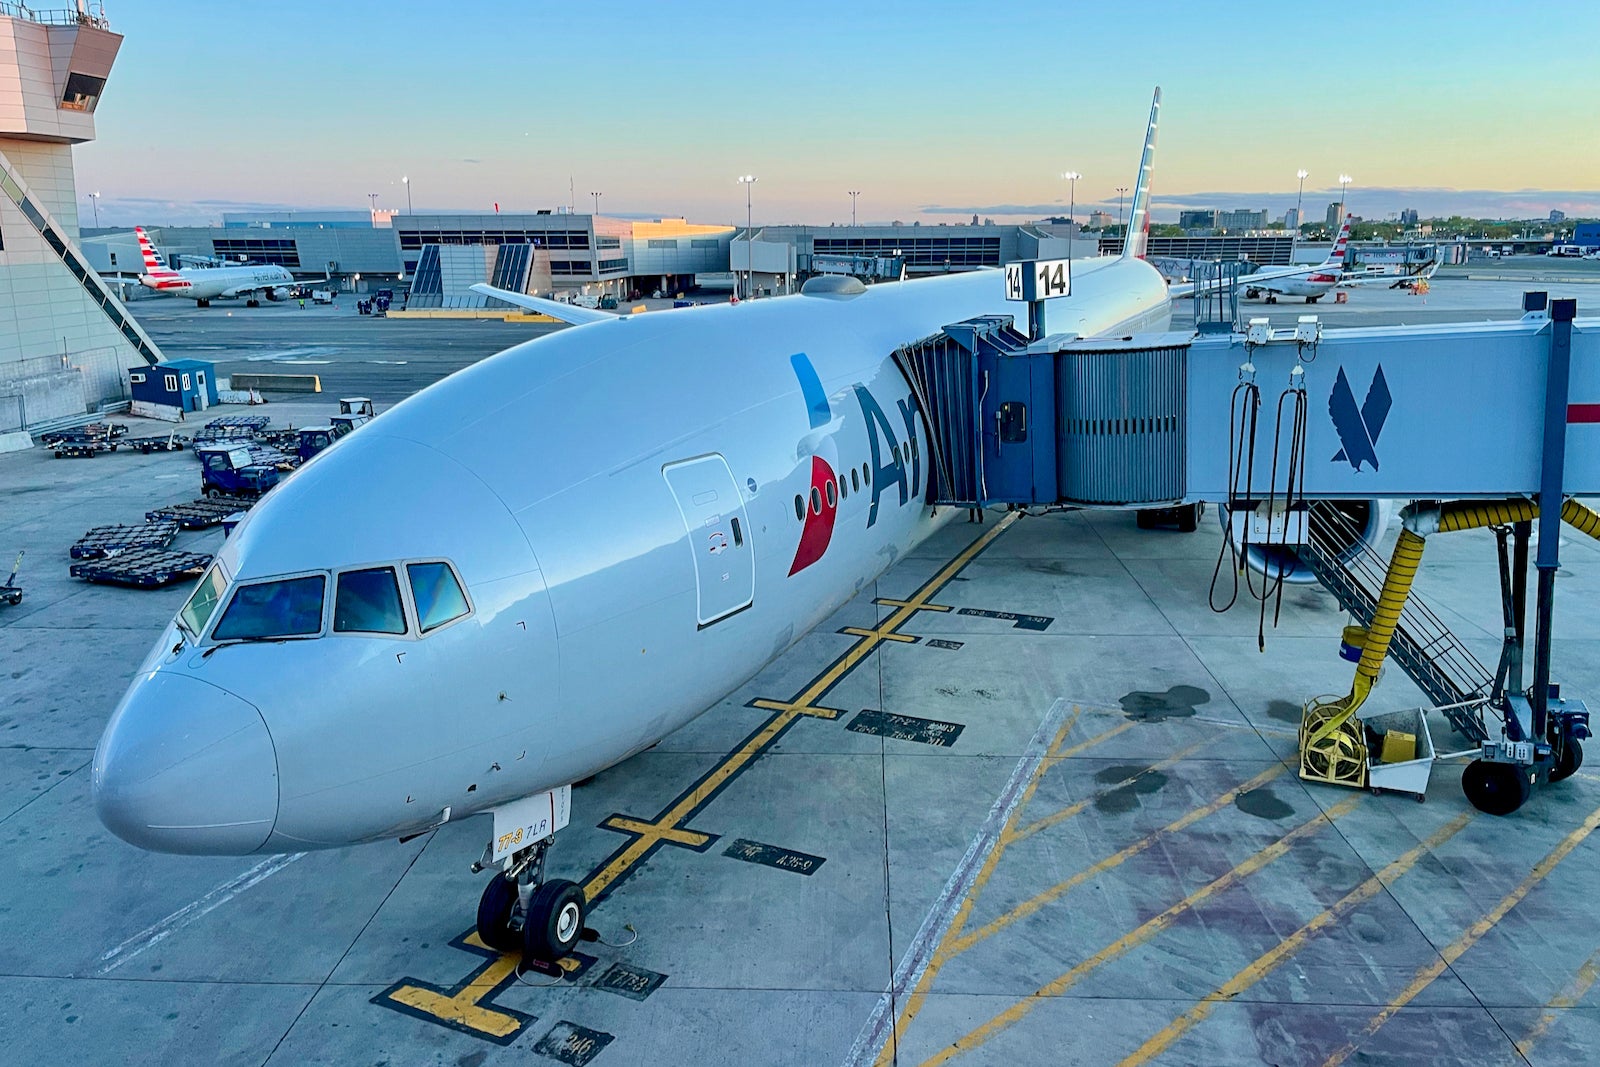 Fourcabin review Putting American Airlines' Boeing 777300ER to the